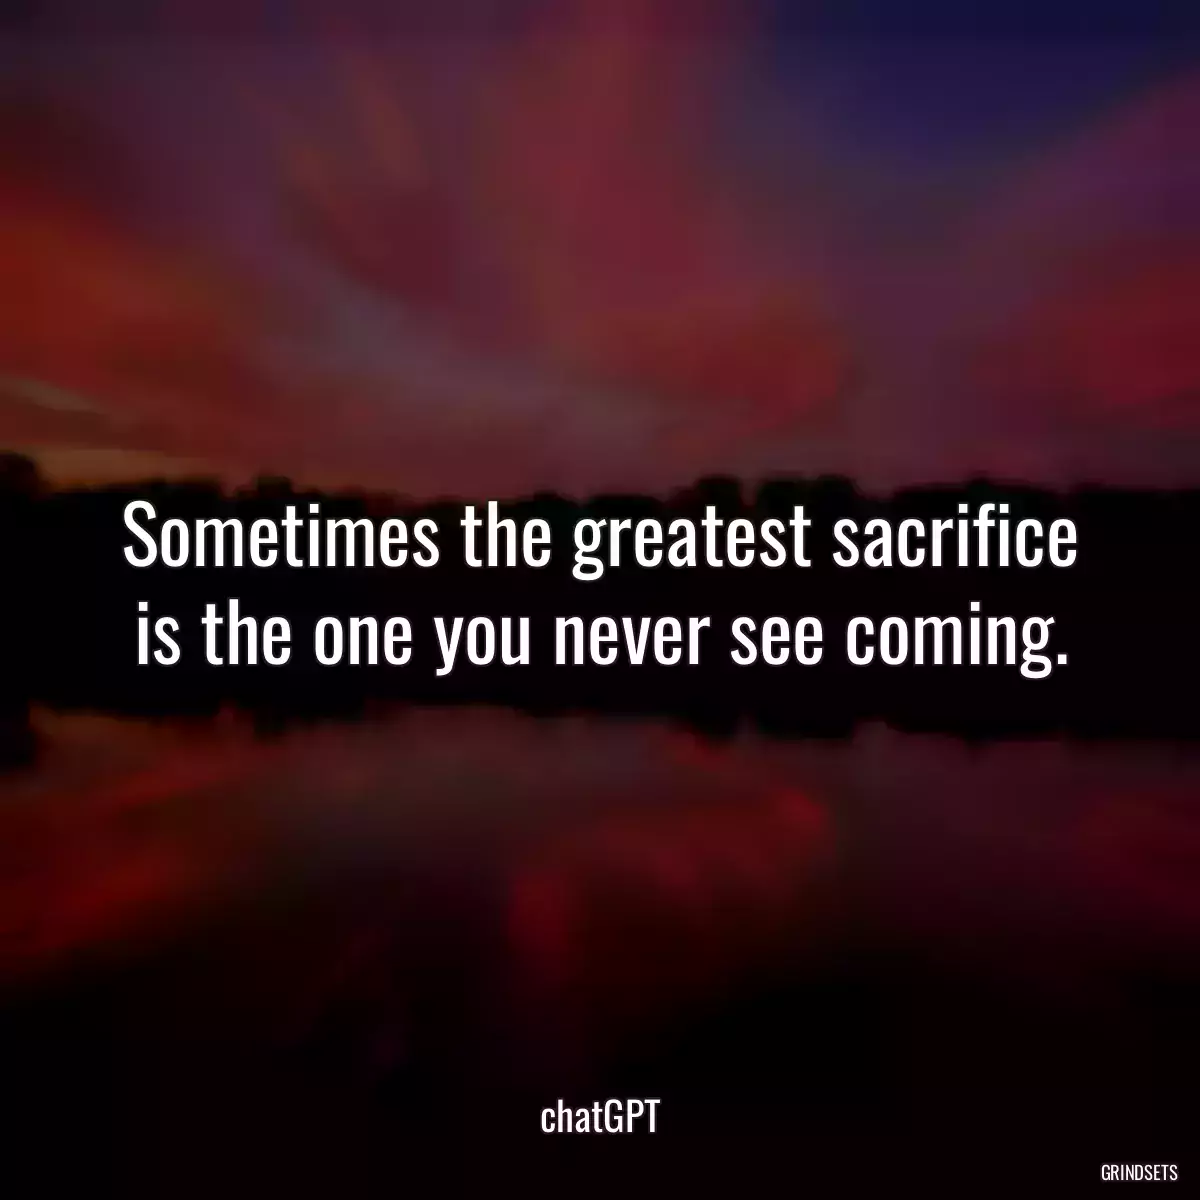 Sometimes the greatest sacrifice is the one you never see coming.